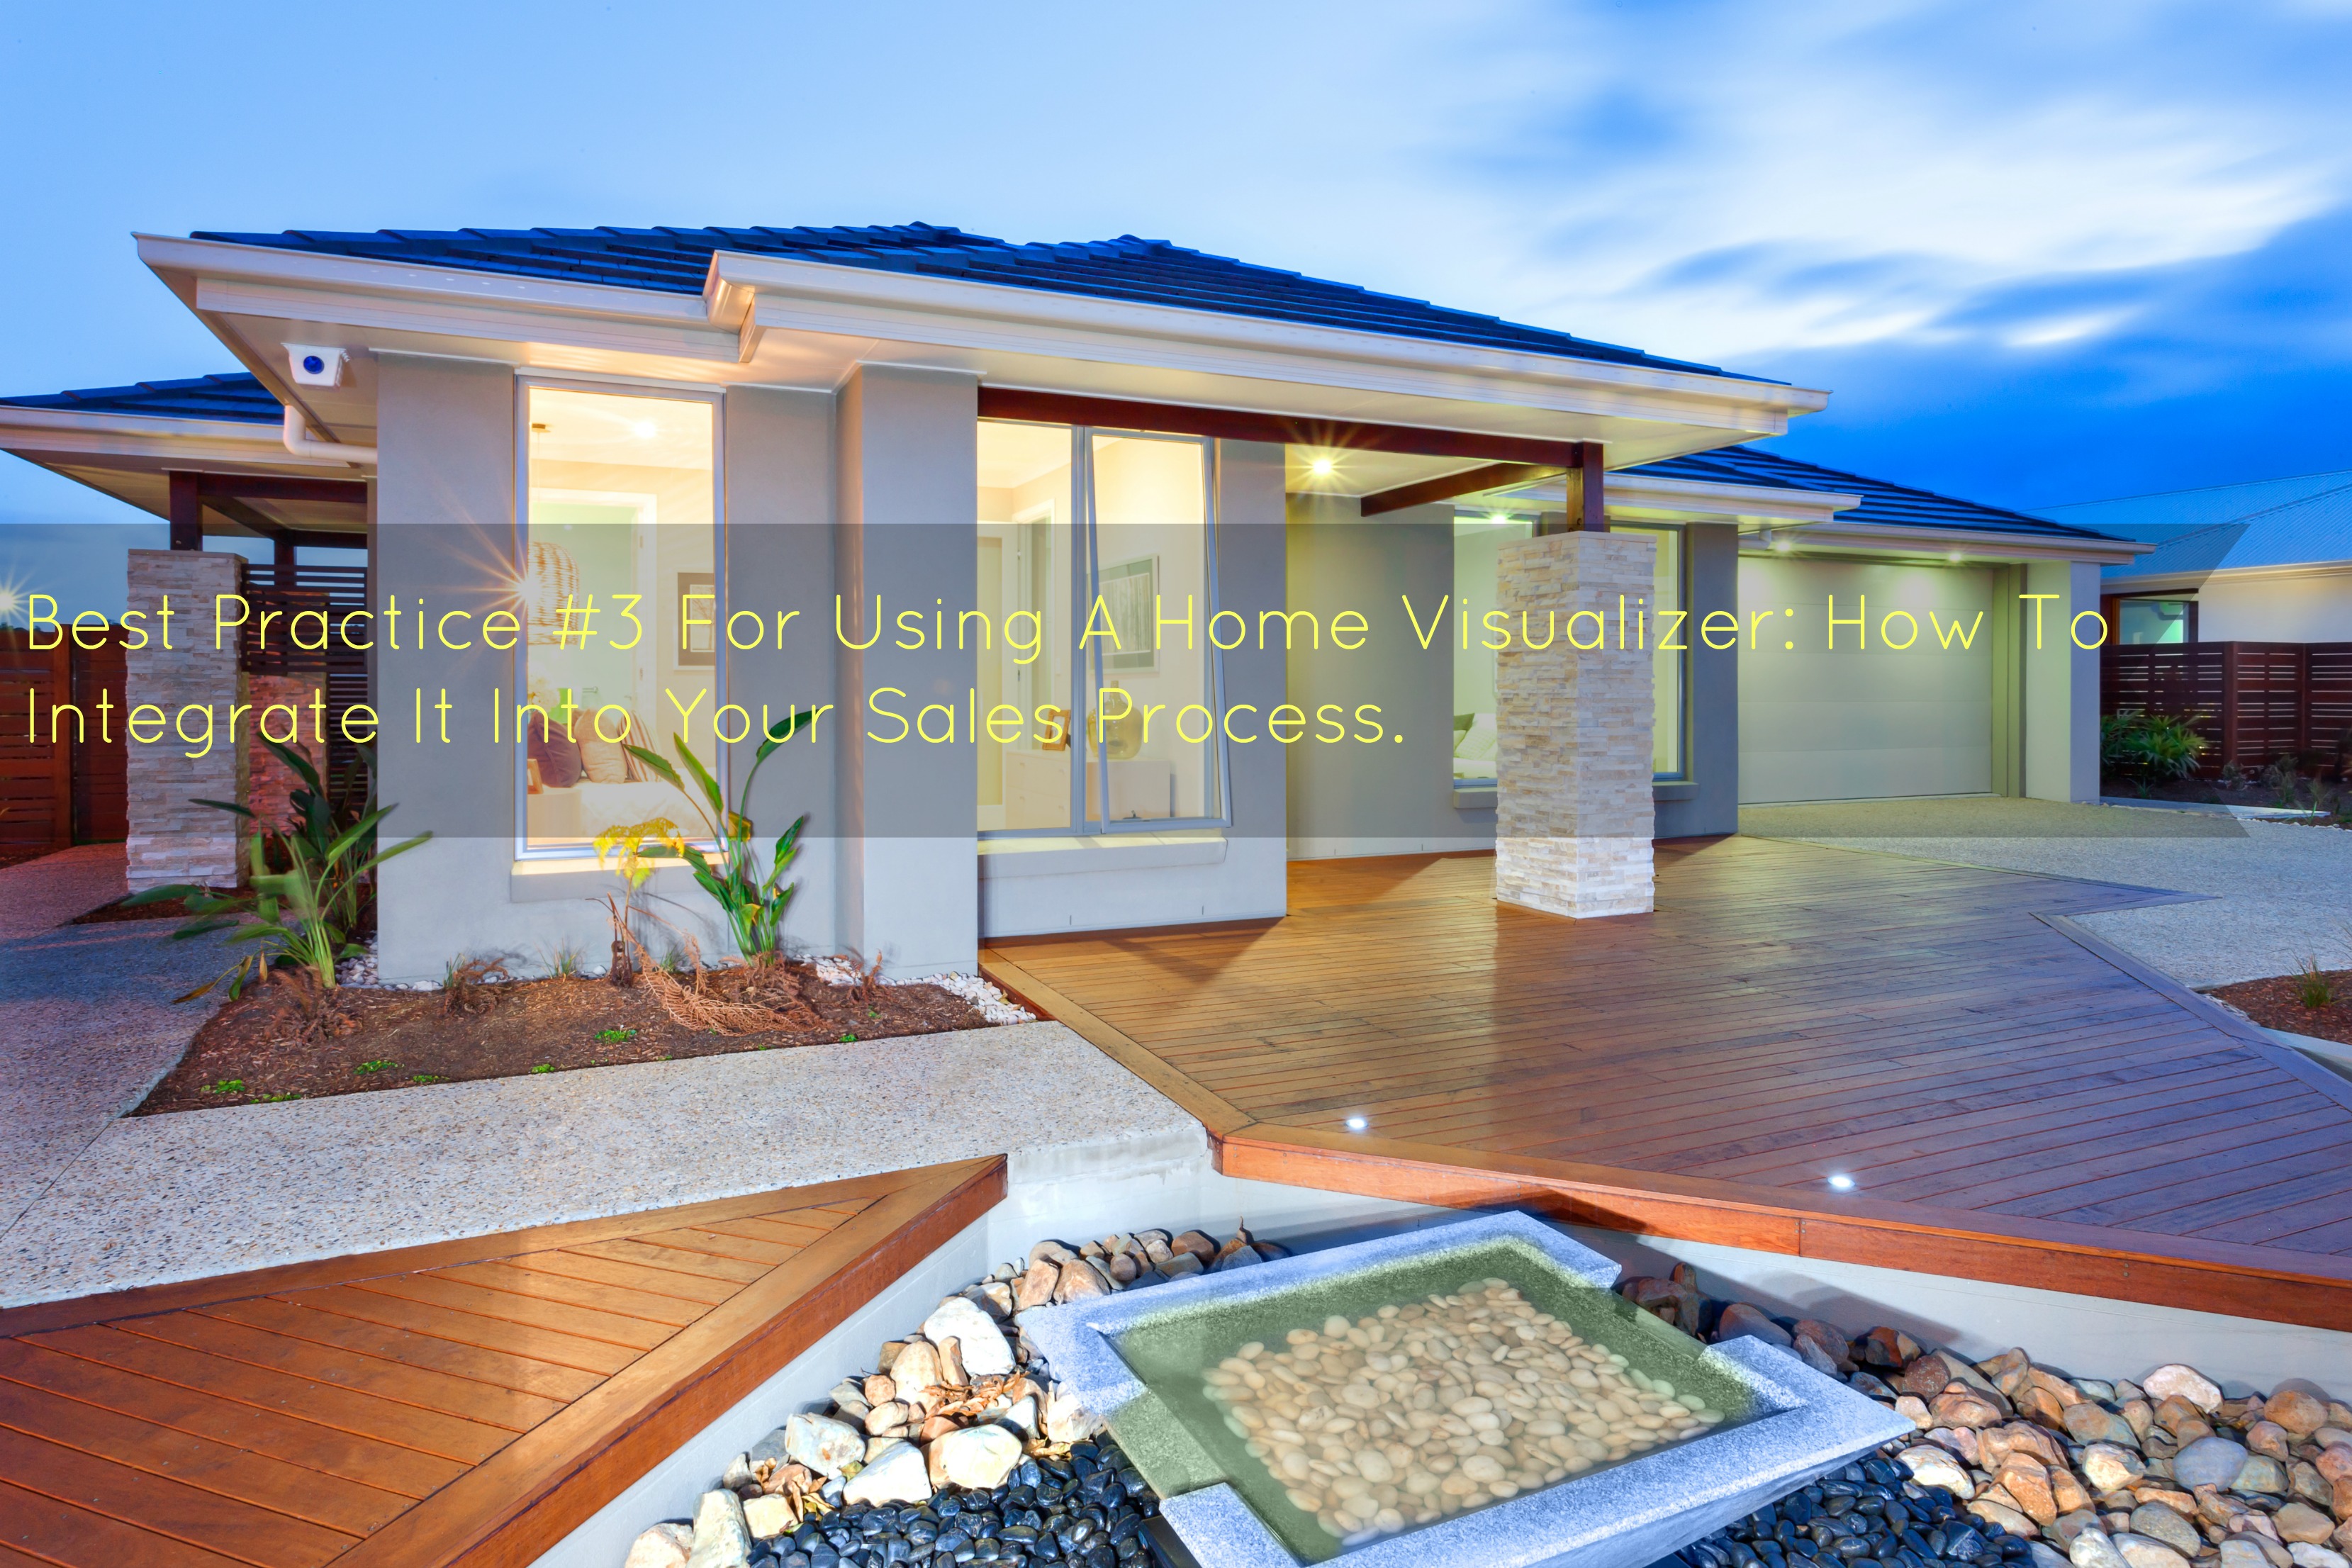 Best Practice #3 For Using A Home Visualizer: How To Integrate It Into Your Sales Process.